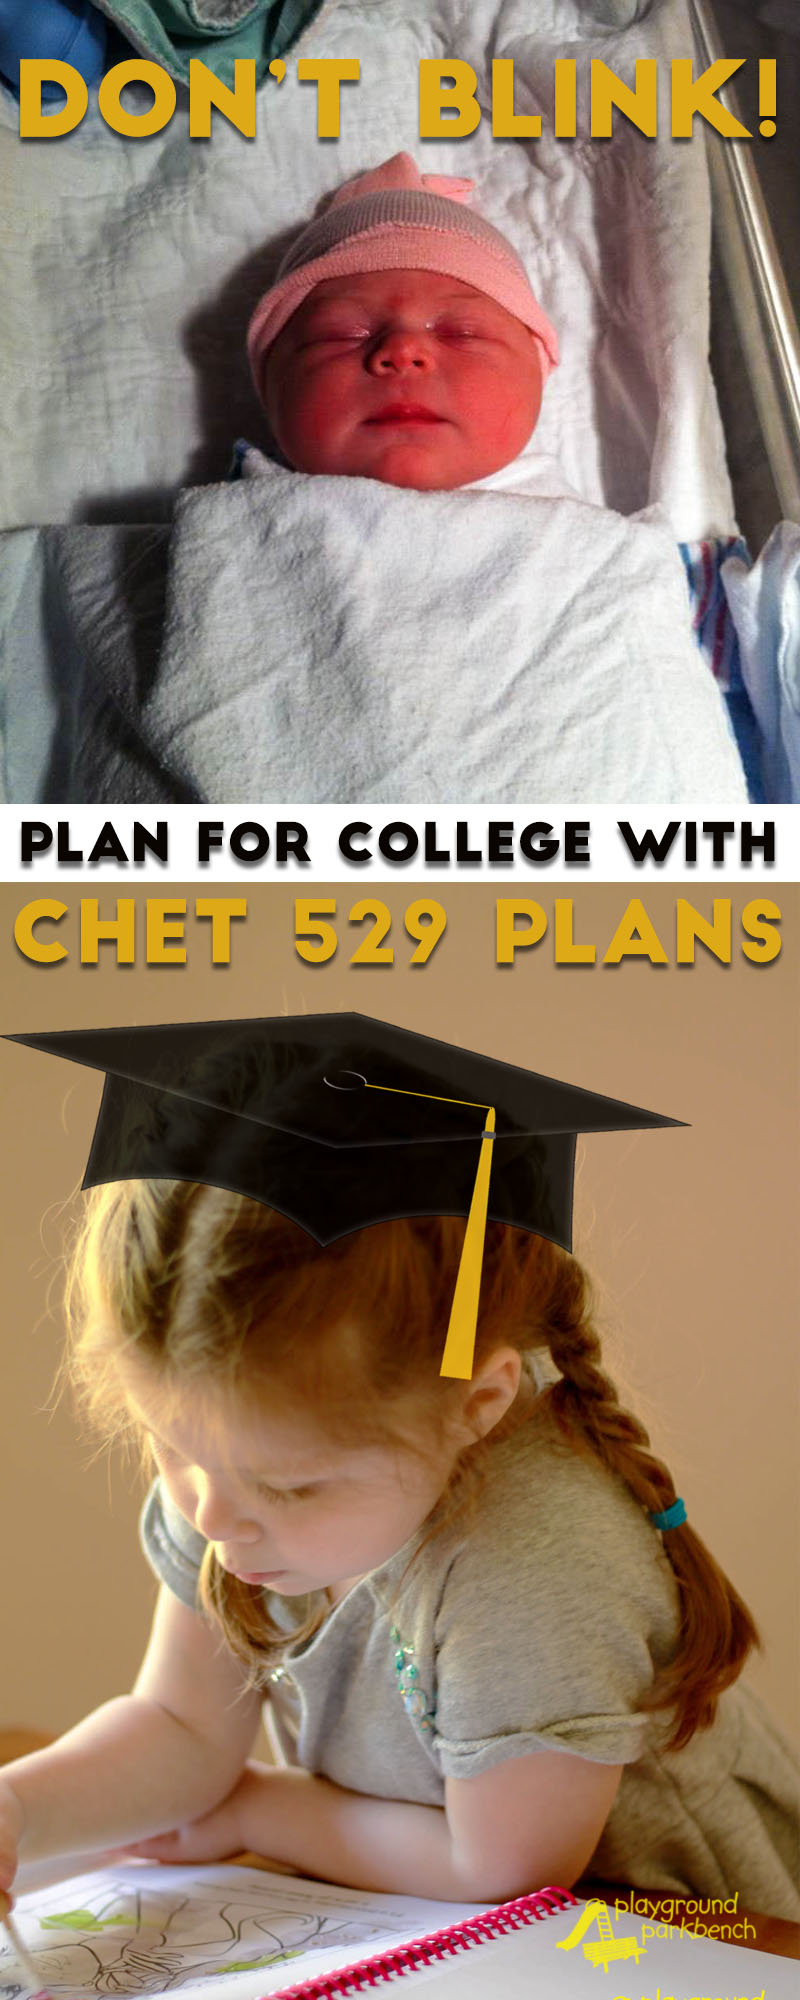 Blink and your baby will be graduating from preschool. Blink again, and they are heading to college. CHET 529 college savings plans can help you prepare for their future. Celebrate 5/29 Day and enter giveaway to get a jump start on saving for your child's future | Family Finances | College Savings | 529 Plans | Connecticut |